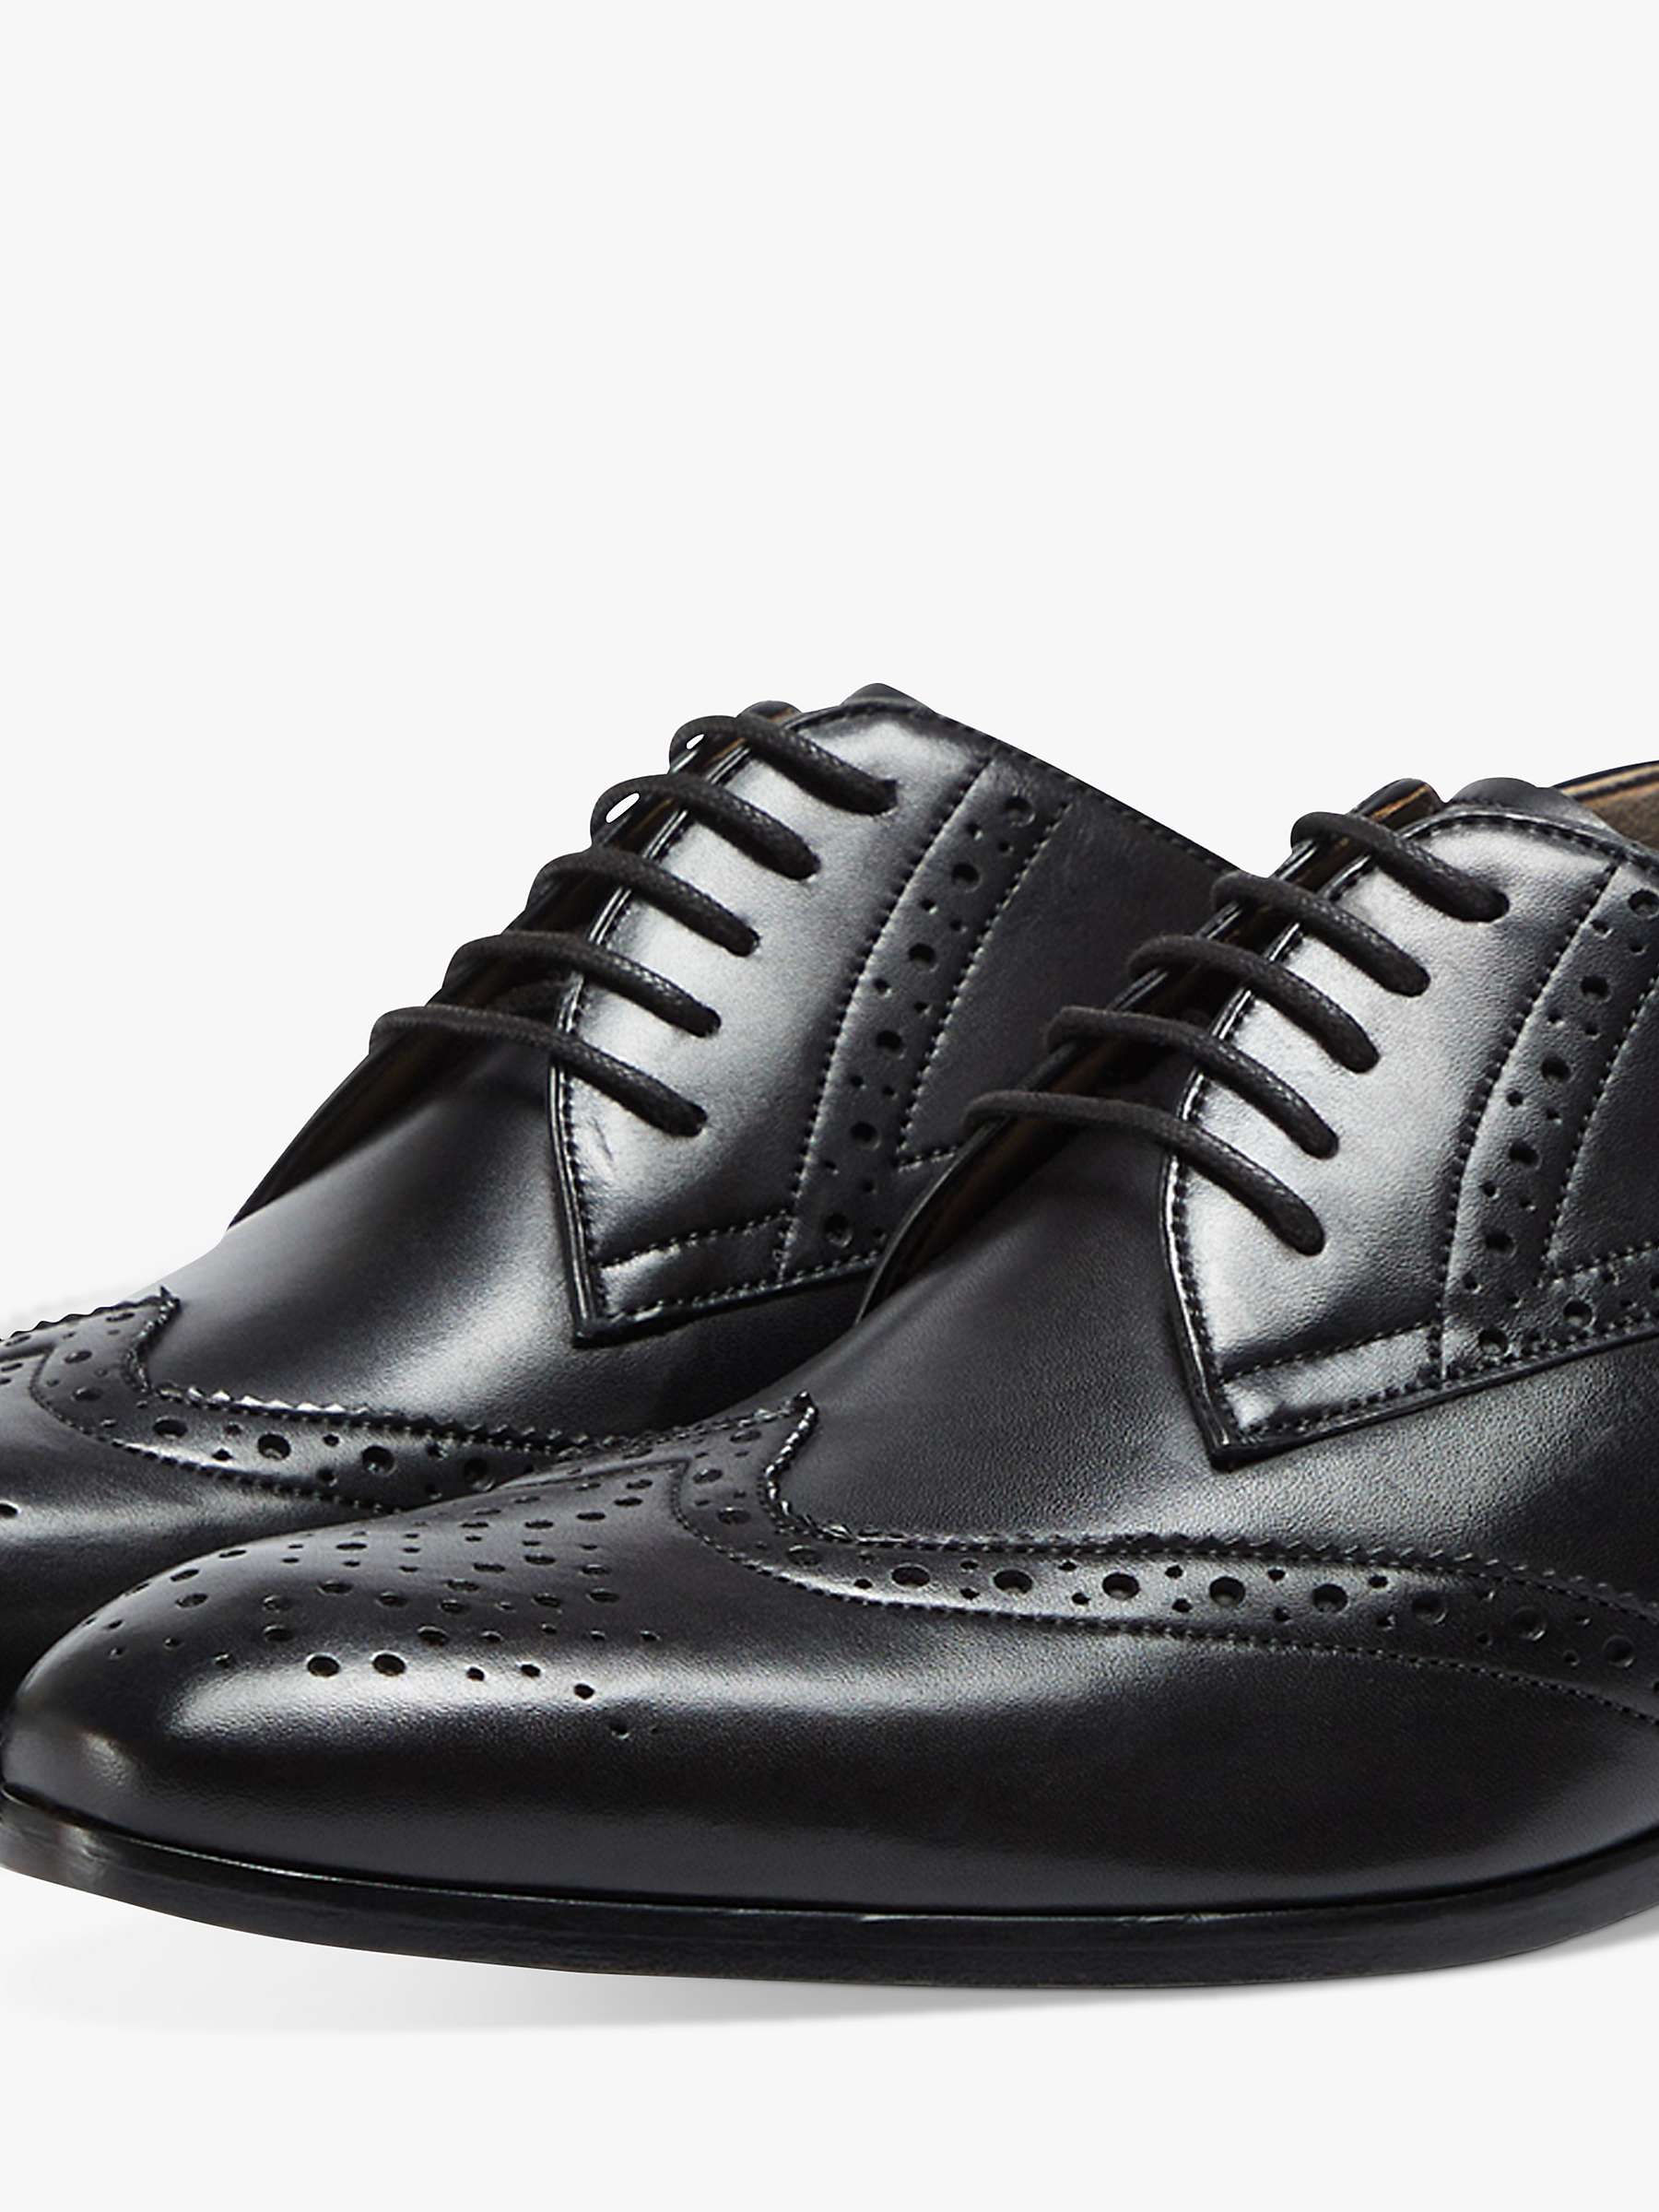 Buy Oliver Sweeney Fressingfield Derby Brogue Shoes, Black Online at johnlewis.com